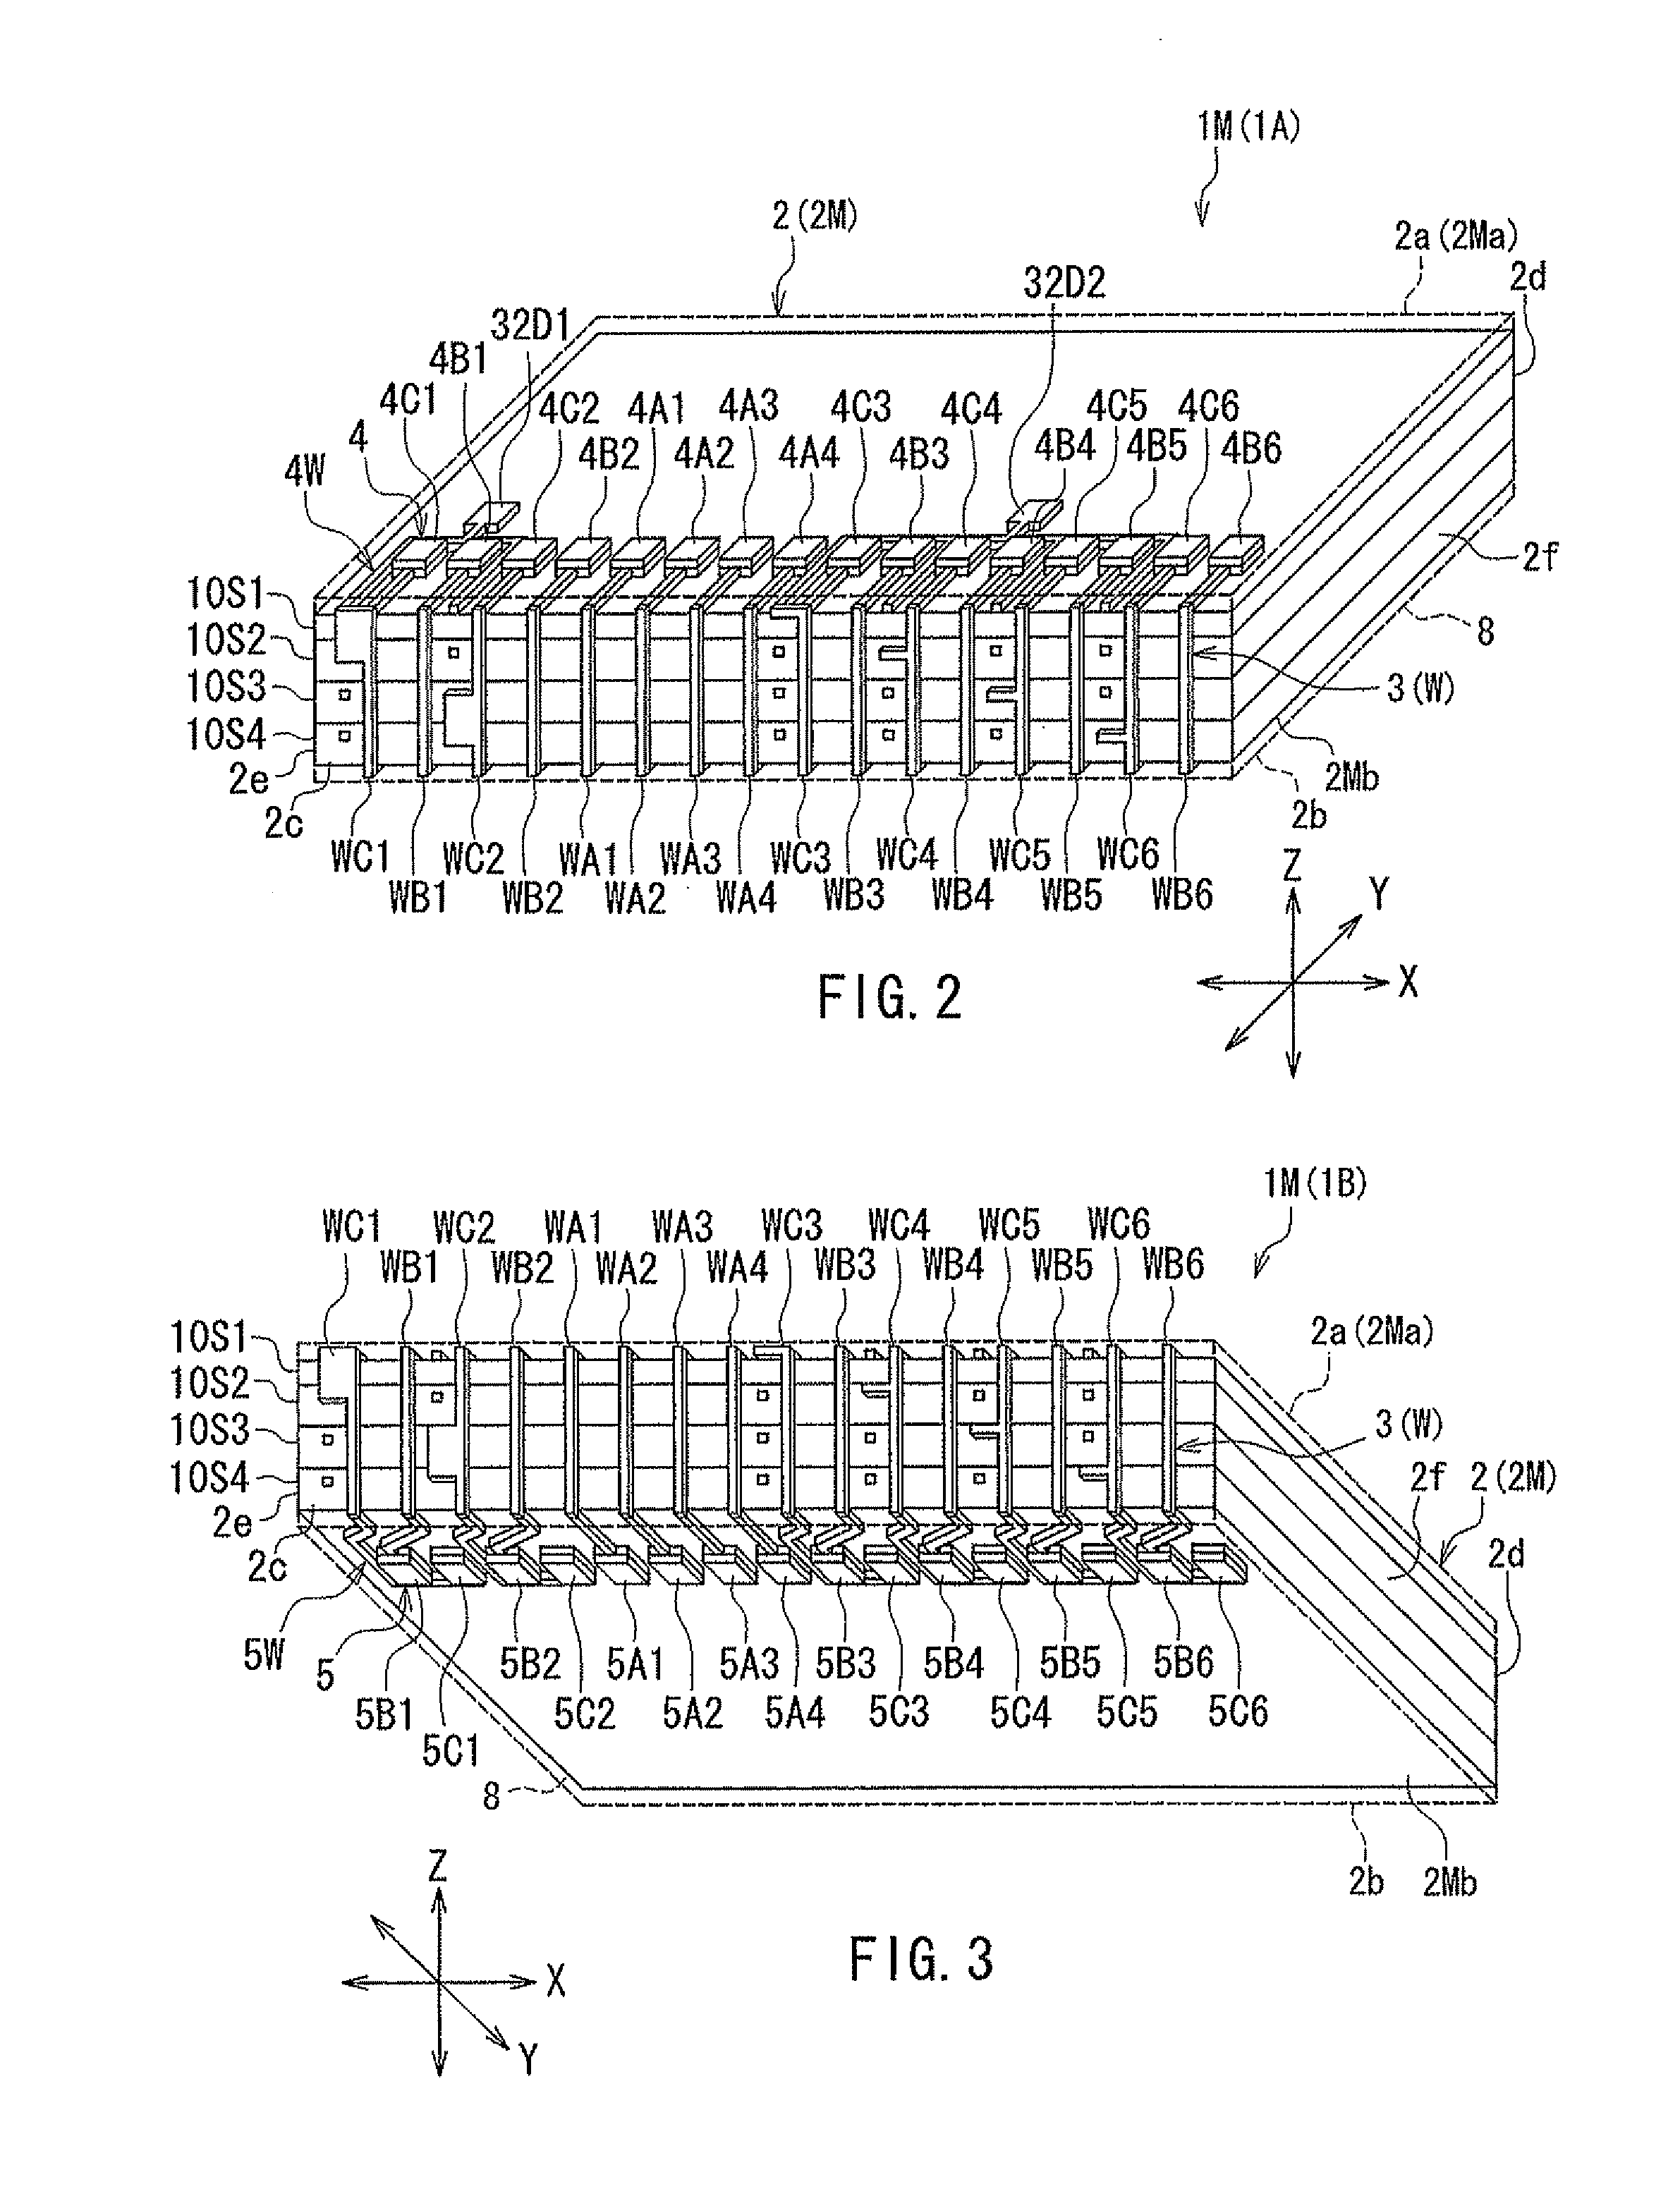 Manufacturing method for layered chip packages